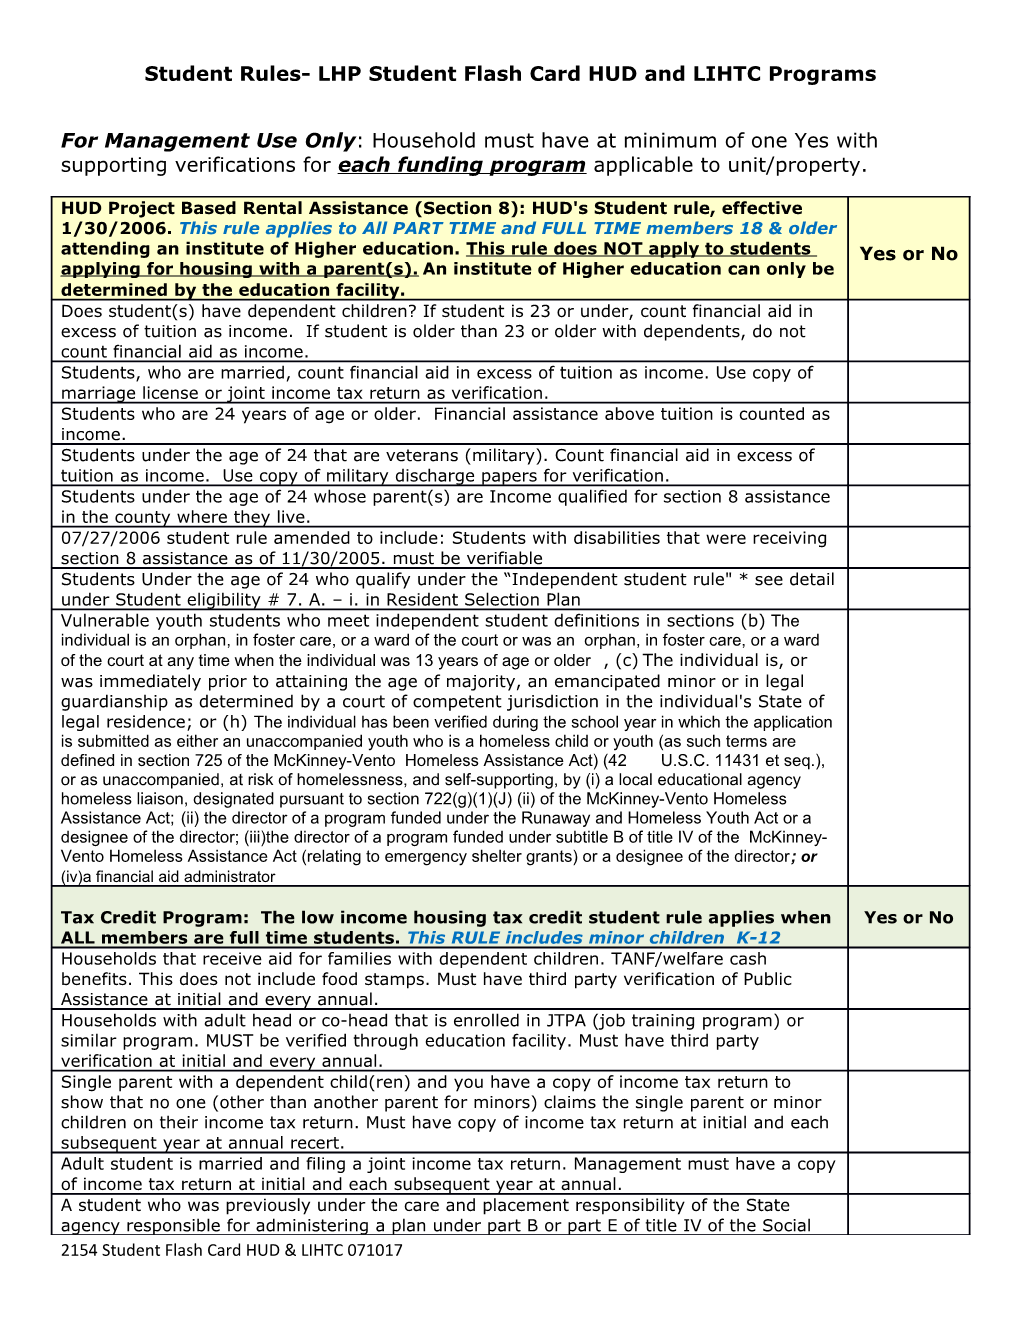 Student Rules- LHP Student Flash Card HUD and LIHTC Programs